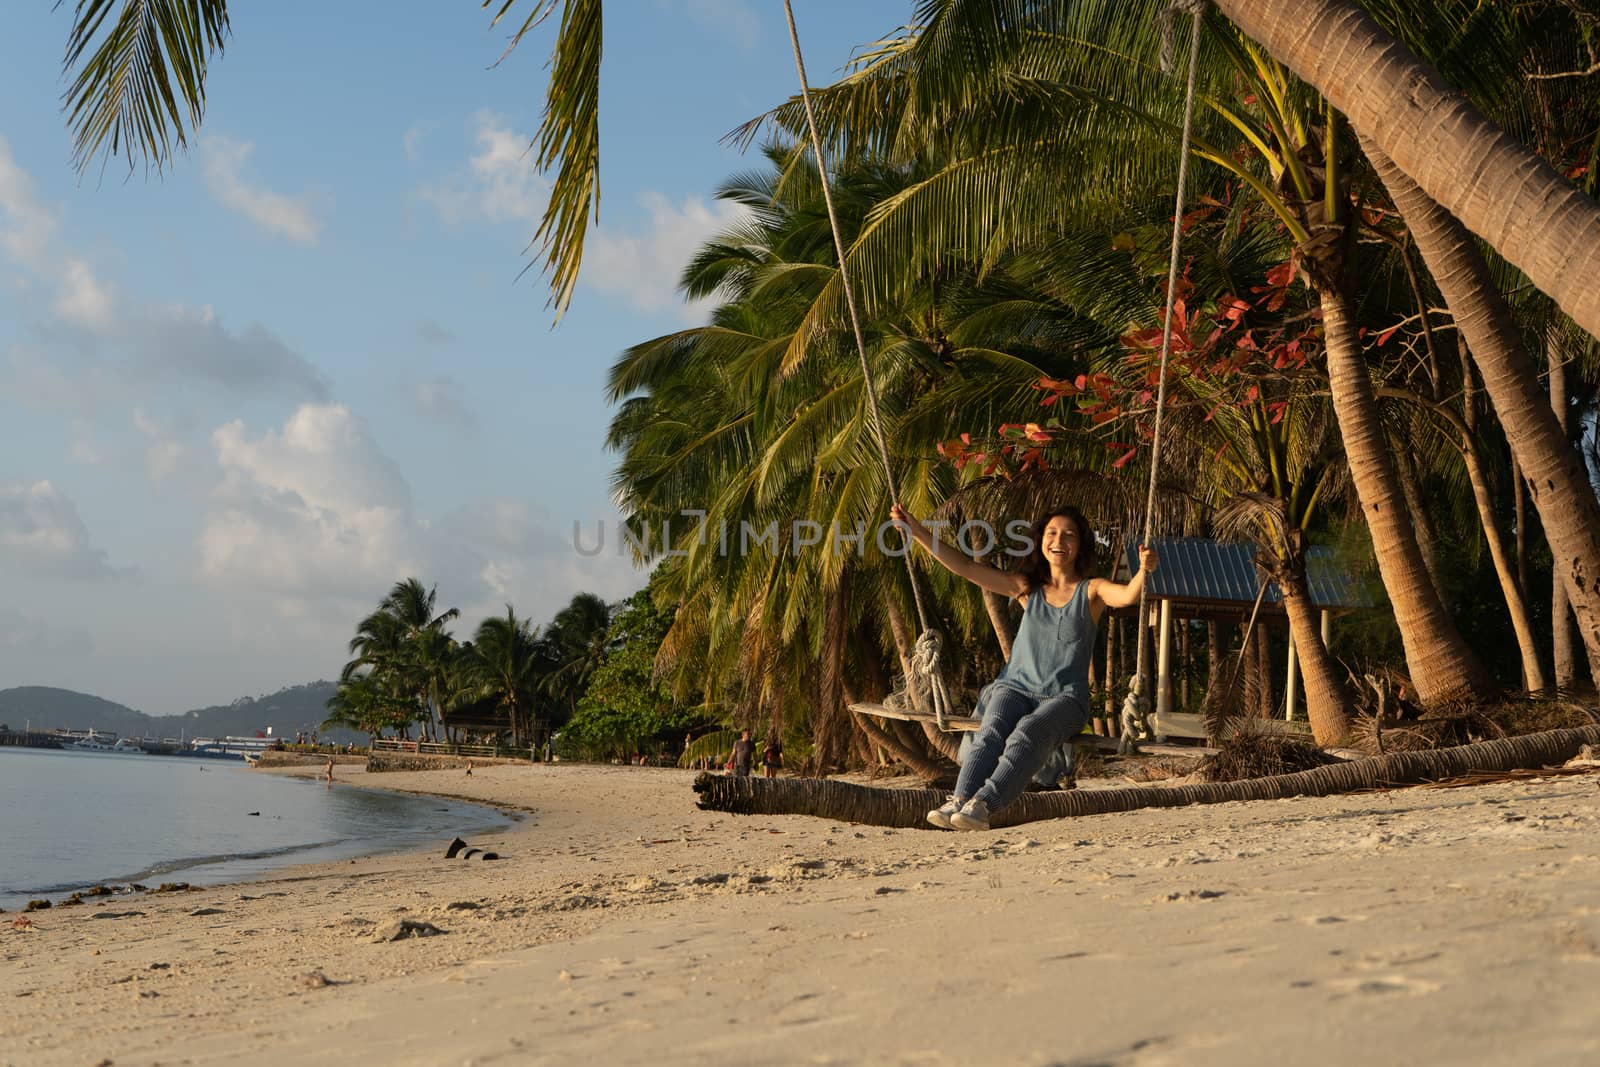 The girl on the beach rides on a swing during sunset. Sunset in the tropics, enjoying nature. Swing tied to a palm tree by the ocean.